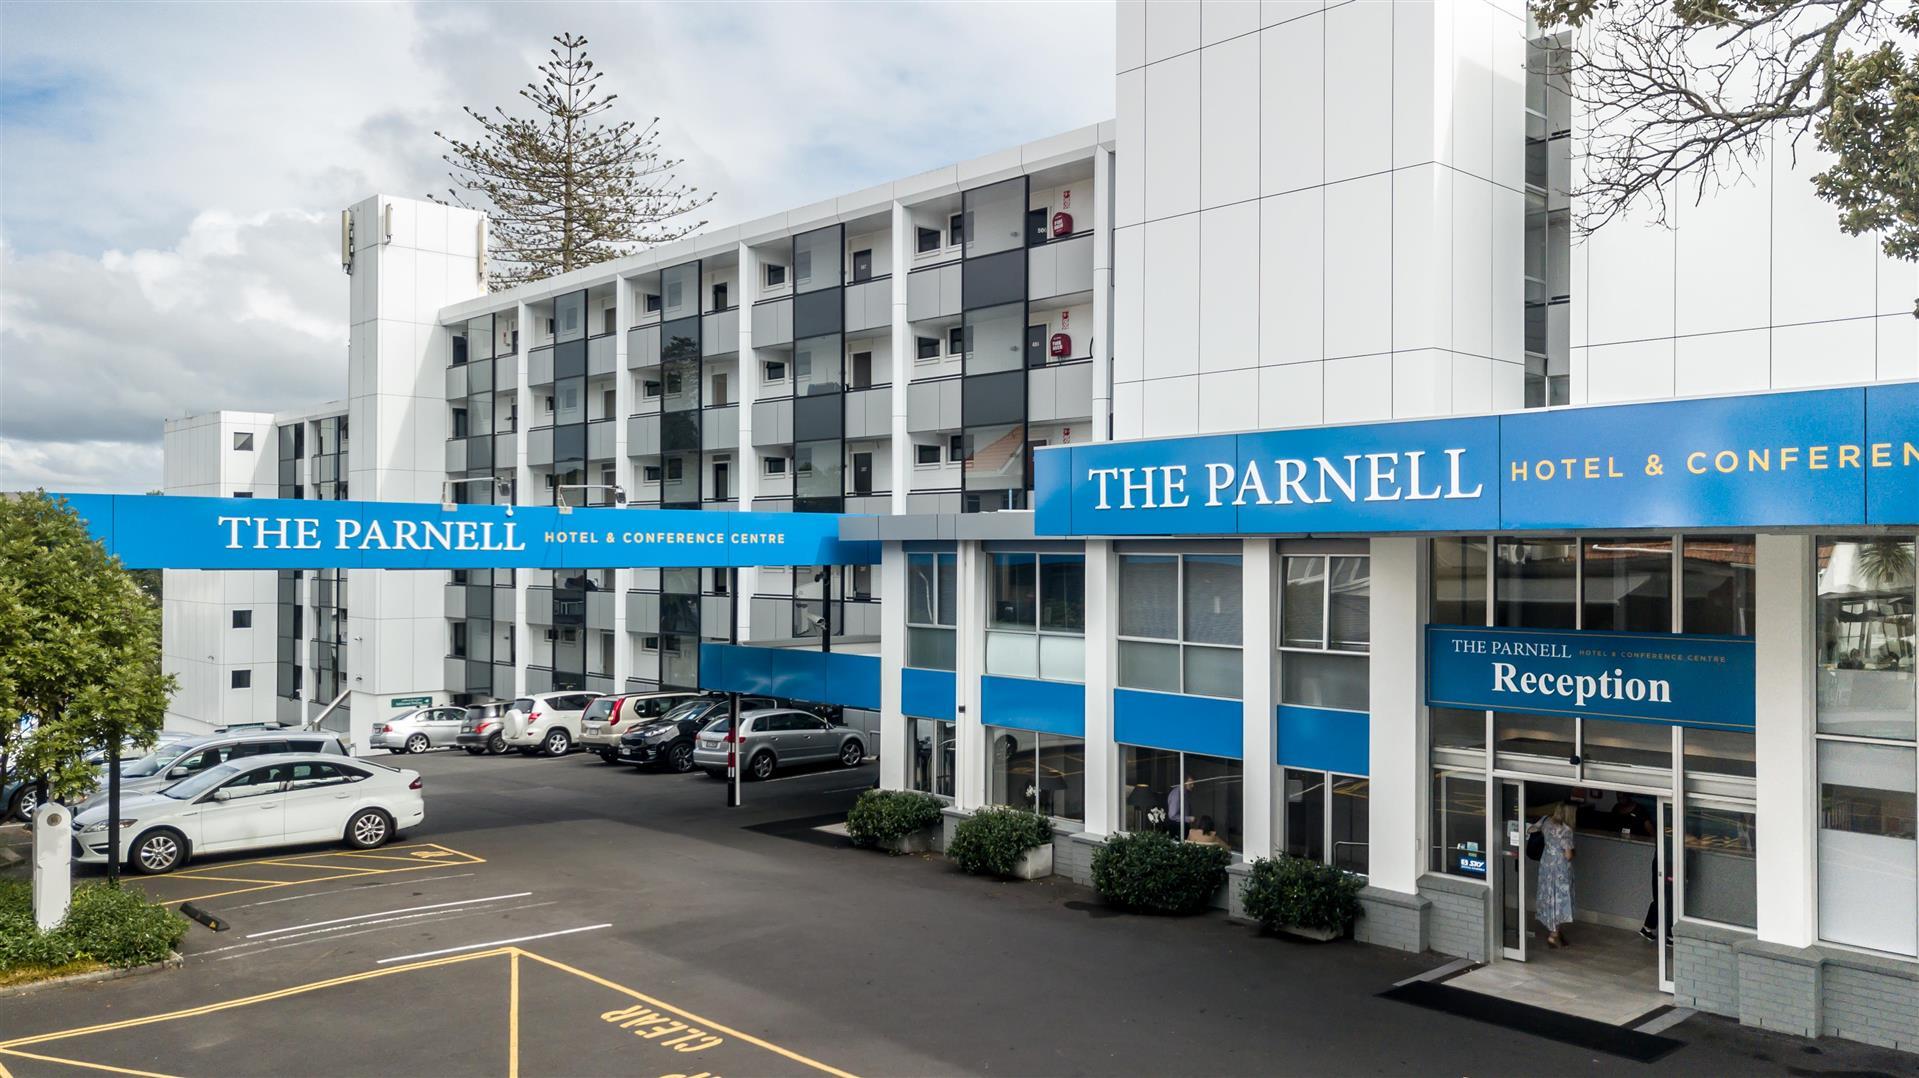 The Parnell Hotel & Conference Centre Limited in Auckland, NZ